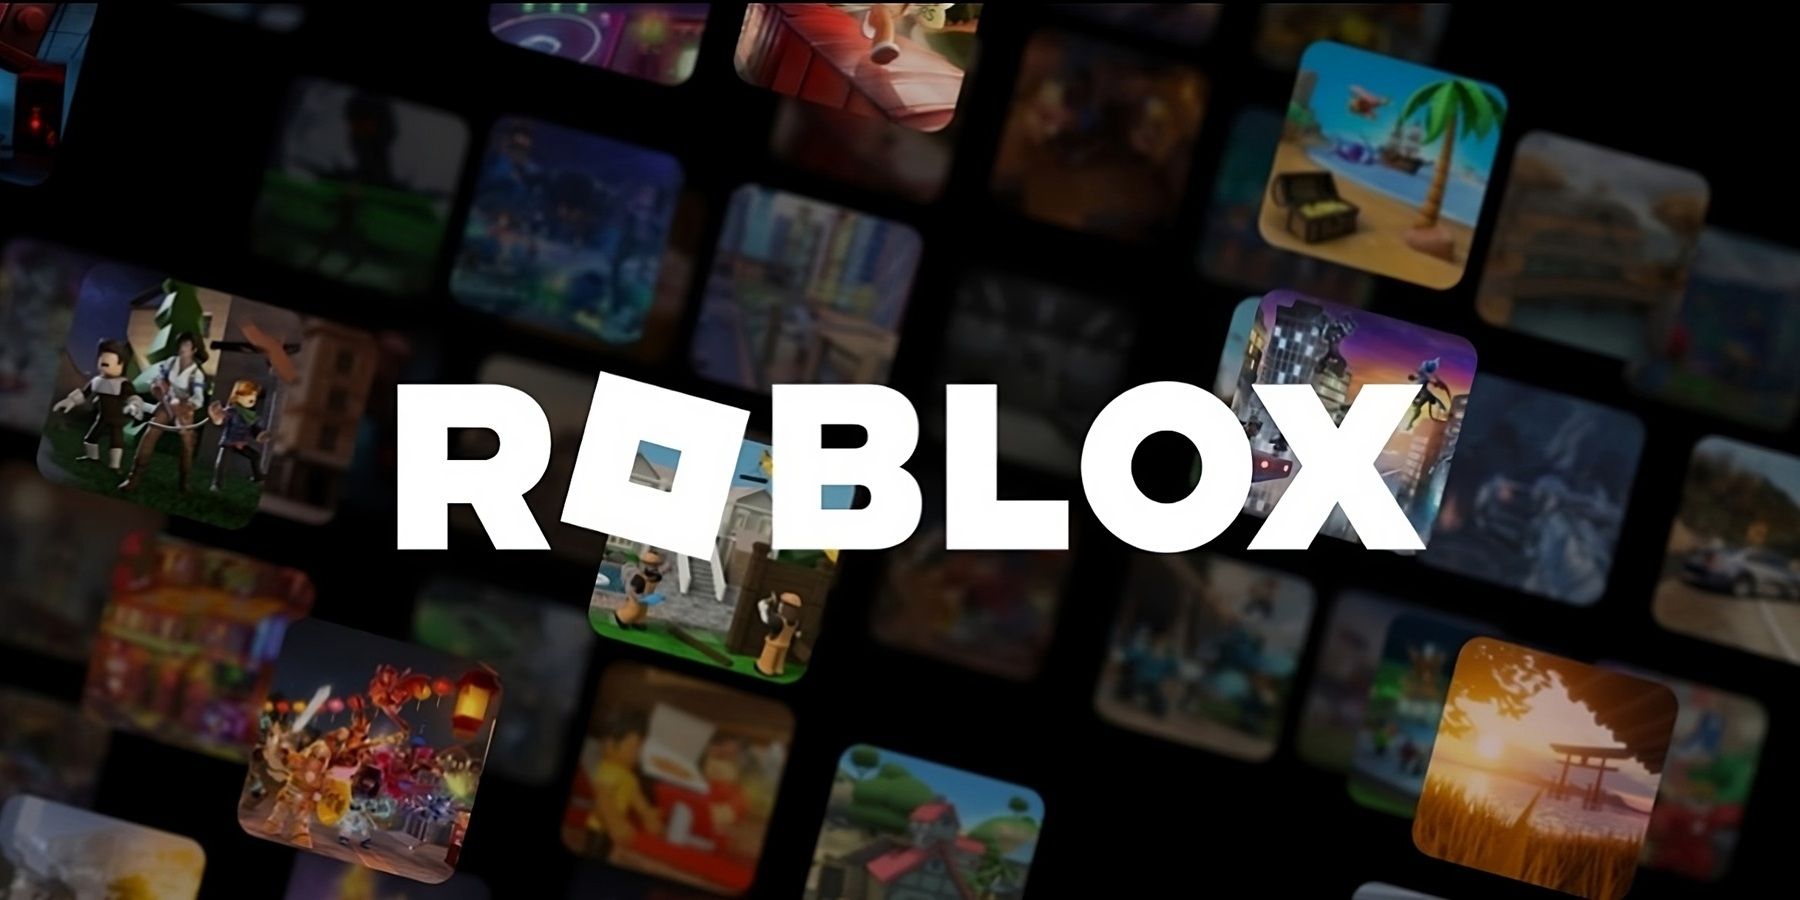 march-15-is-going-to-be-a-big-day-for-roblox-fans